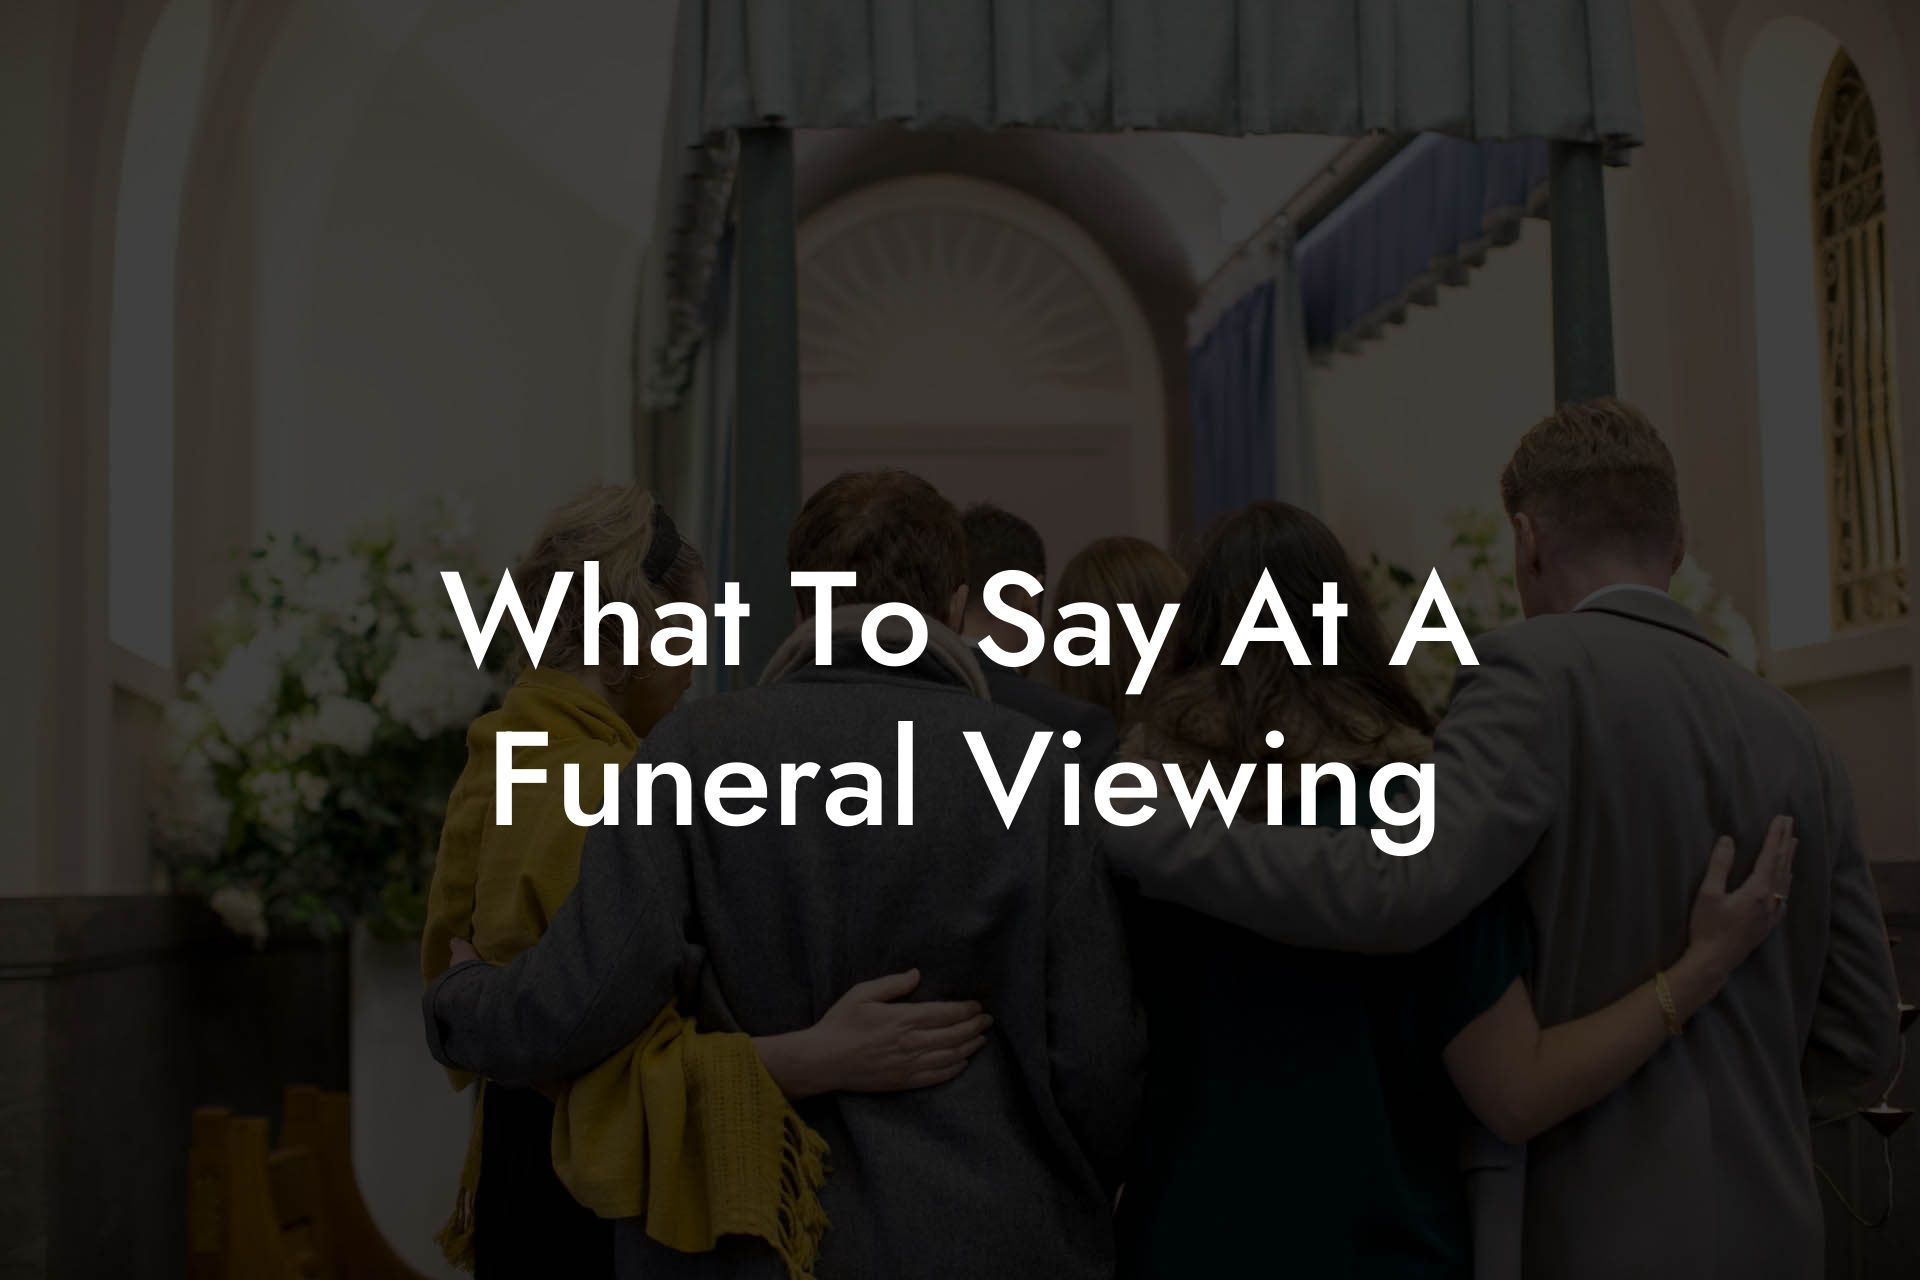 What To Say At A Funeral Viewing